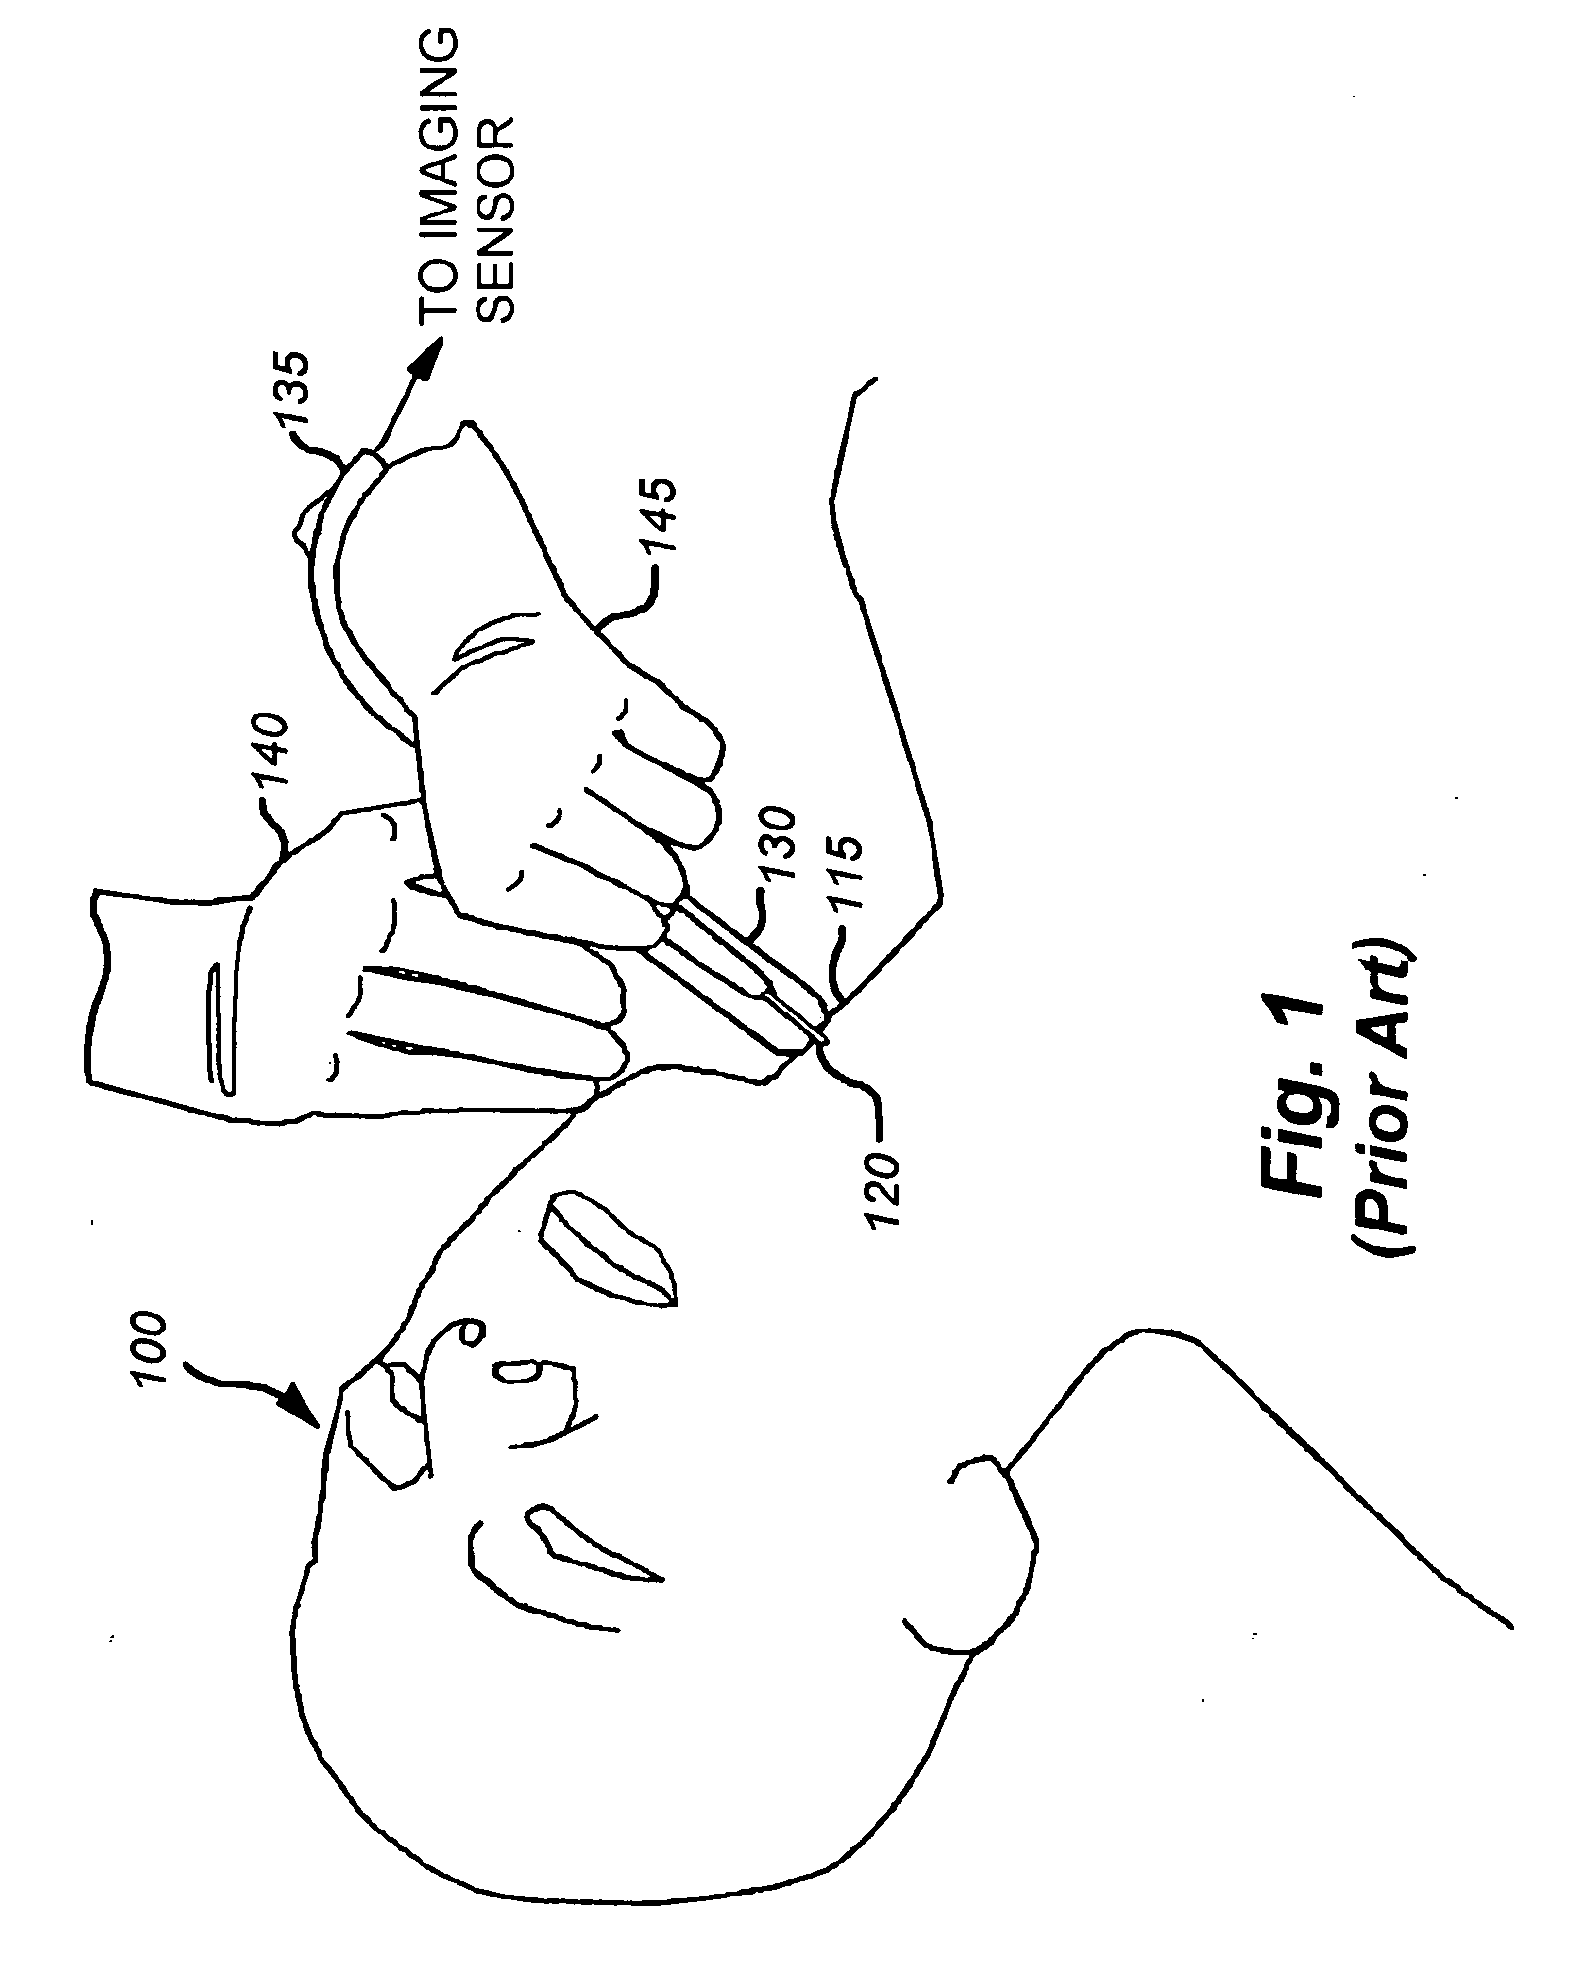 Biomedical positioning and stabilization system